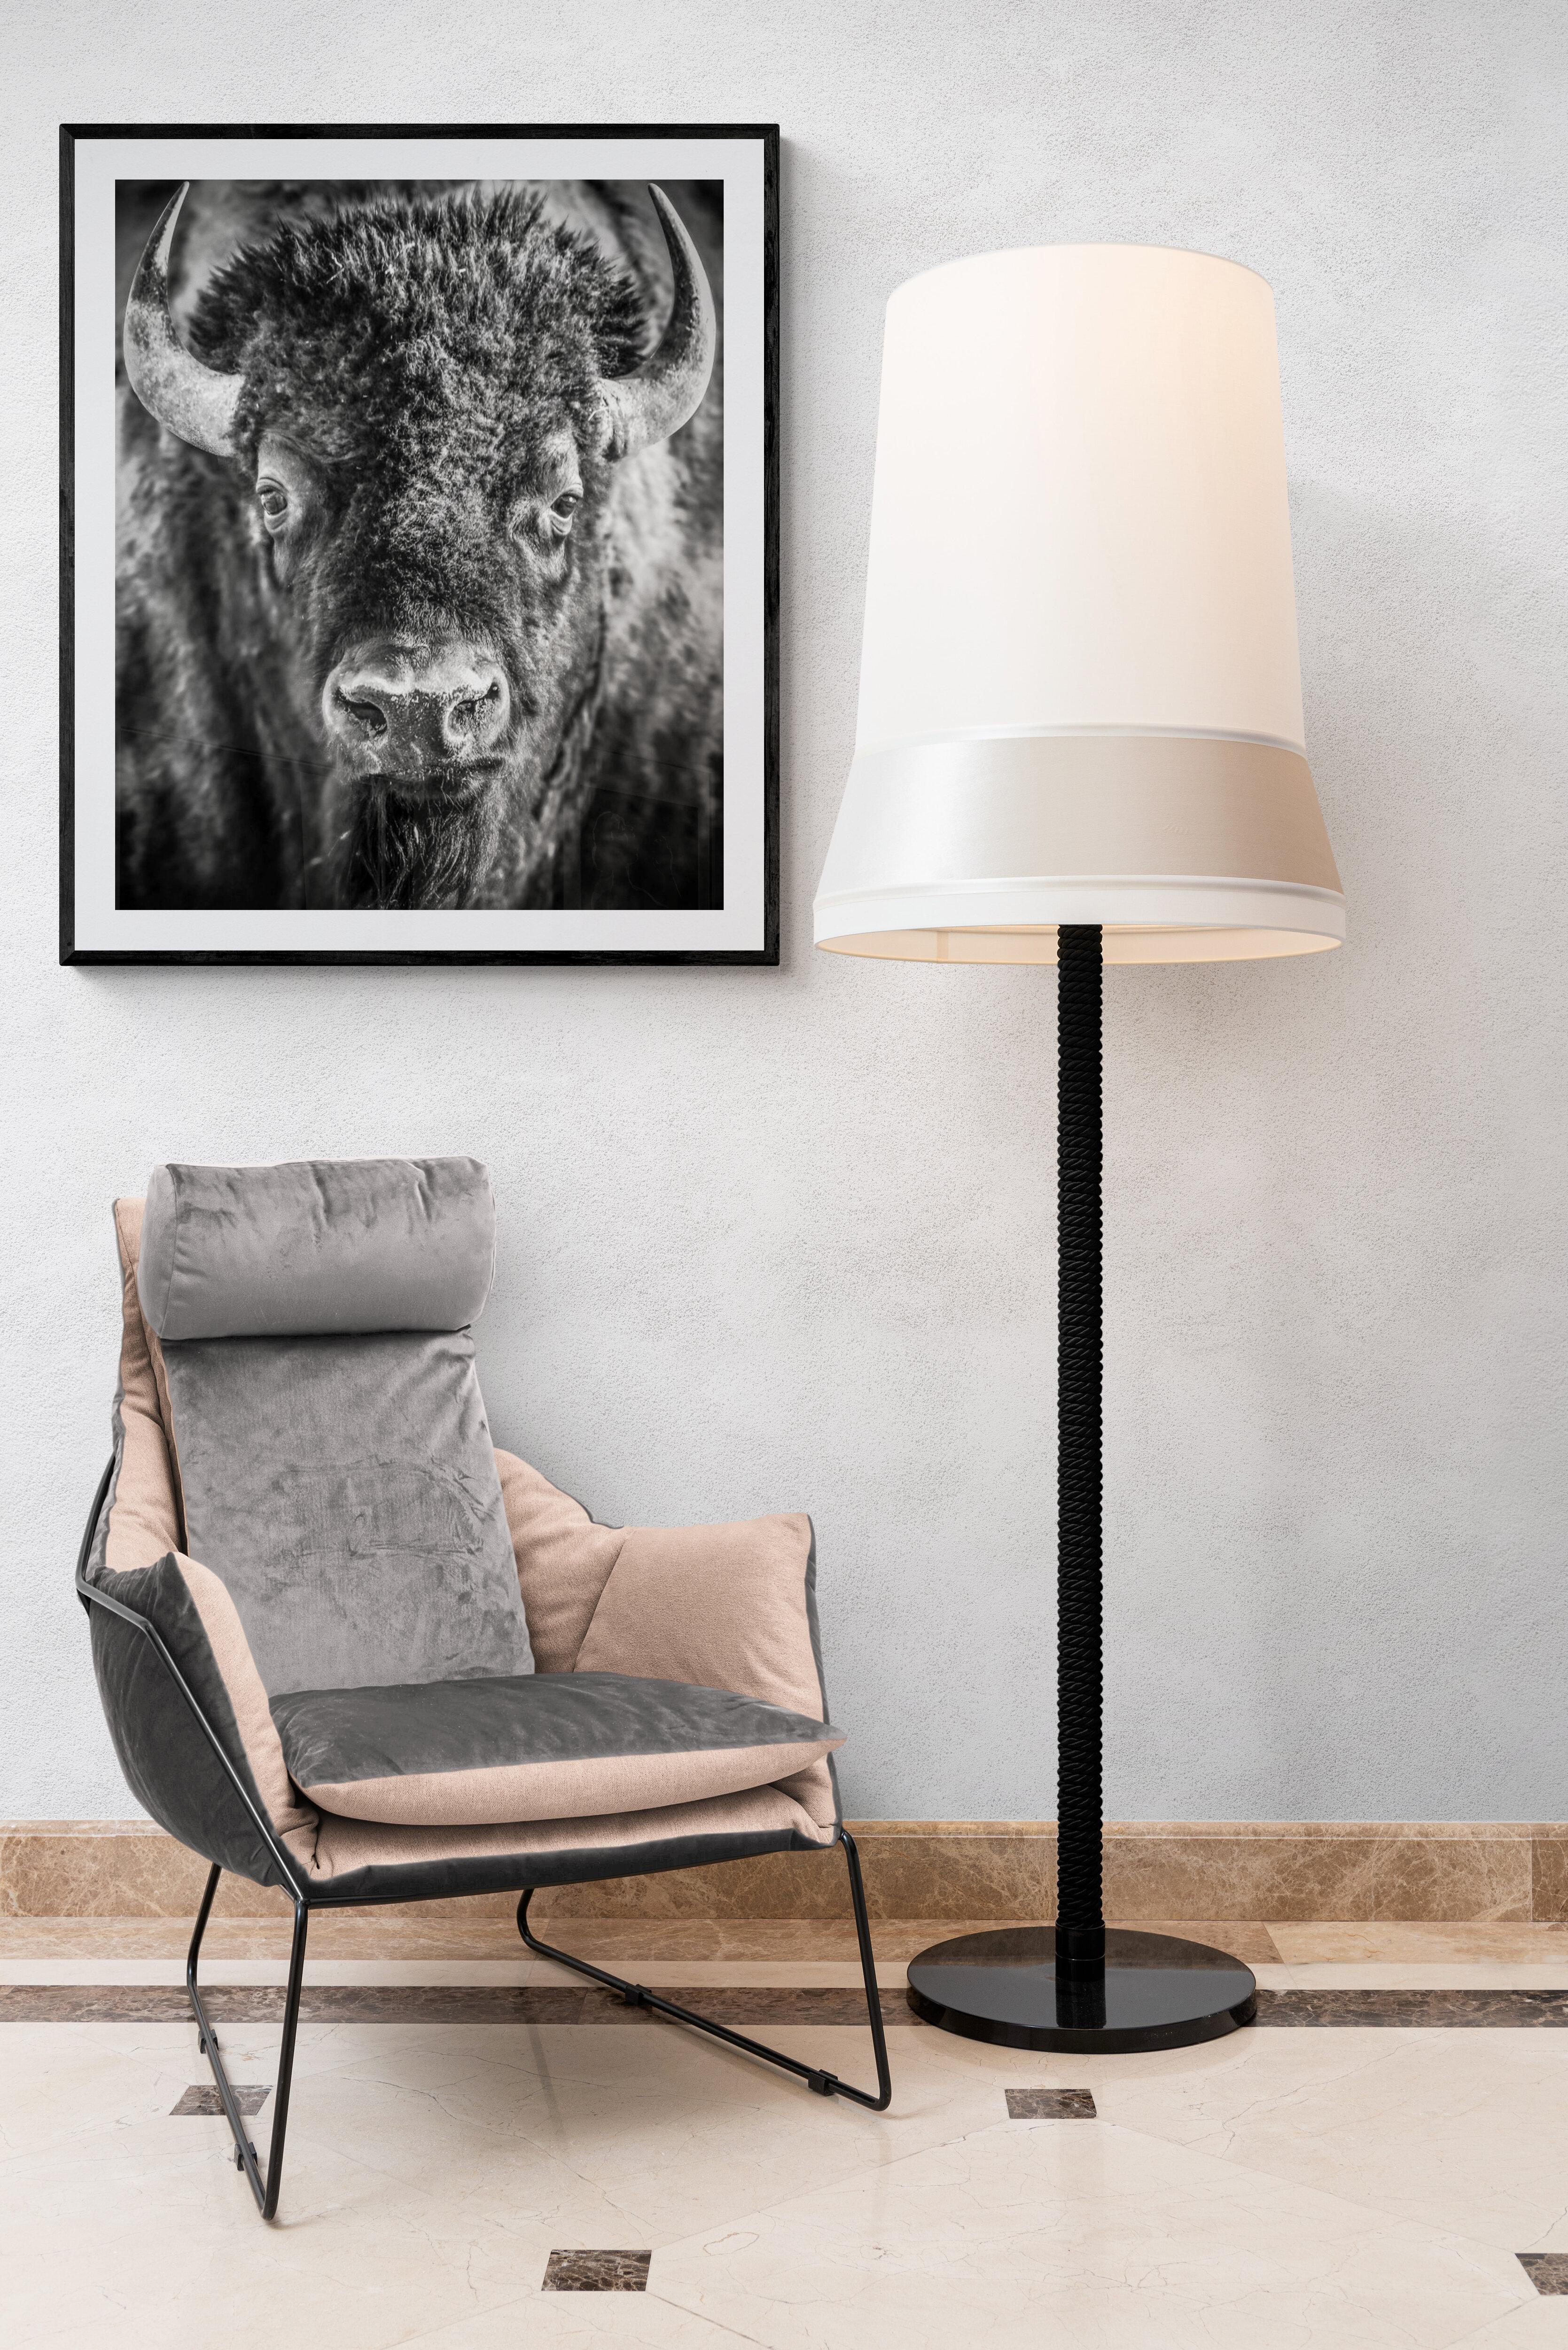 24x36  Bison American Buffalo Photography Art  Exhibition Print Black and White 2